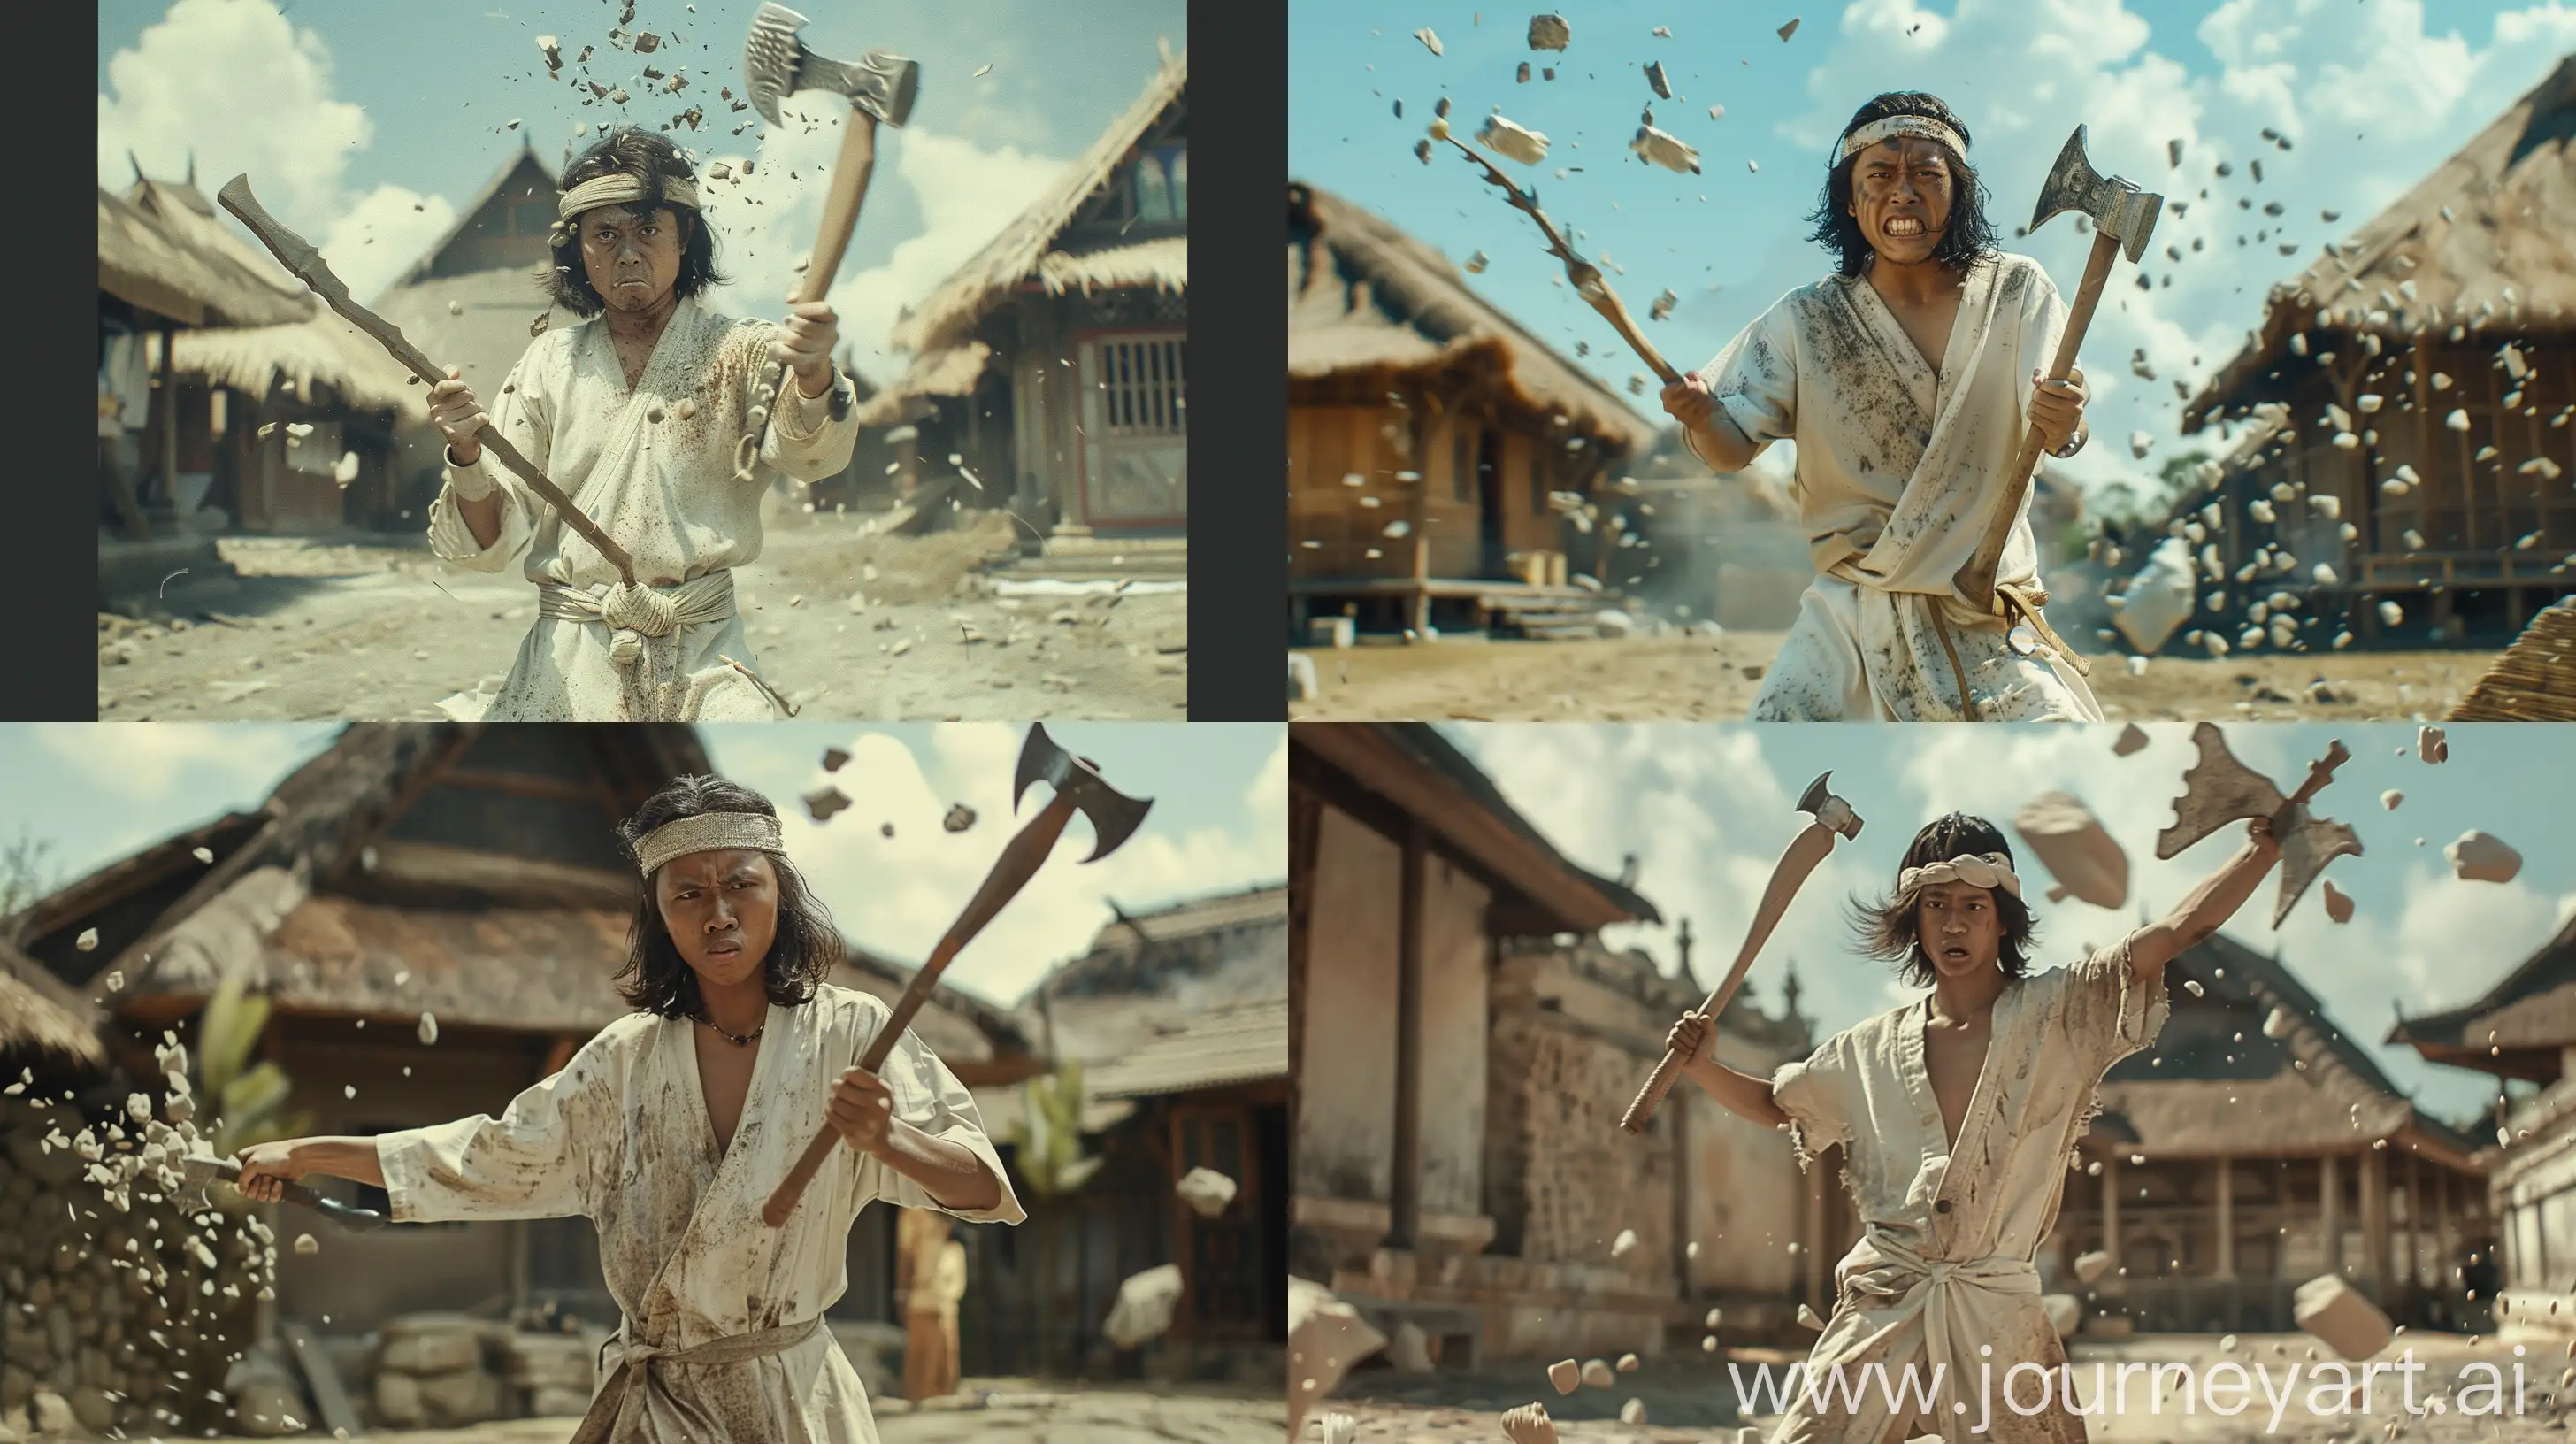 a cinematic film, inspired by the Majapahit style, a 27 year old Indonesian man, humorous face, humor standing in the middle of a village setting. She wore a v-shaped dirty white outfit, revealing her brown skin and shoulder-length black hair tied with a dirty white headband. With comedic flair, he threw a short, double-bladed ax with a flute-like handle and a dragon-shaped tip, sending stone shards flying as he threw the double-bladed sword into the air. Created Using: Majapahit style, humor, HDR effect --ar 16:9 --v 6.0
